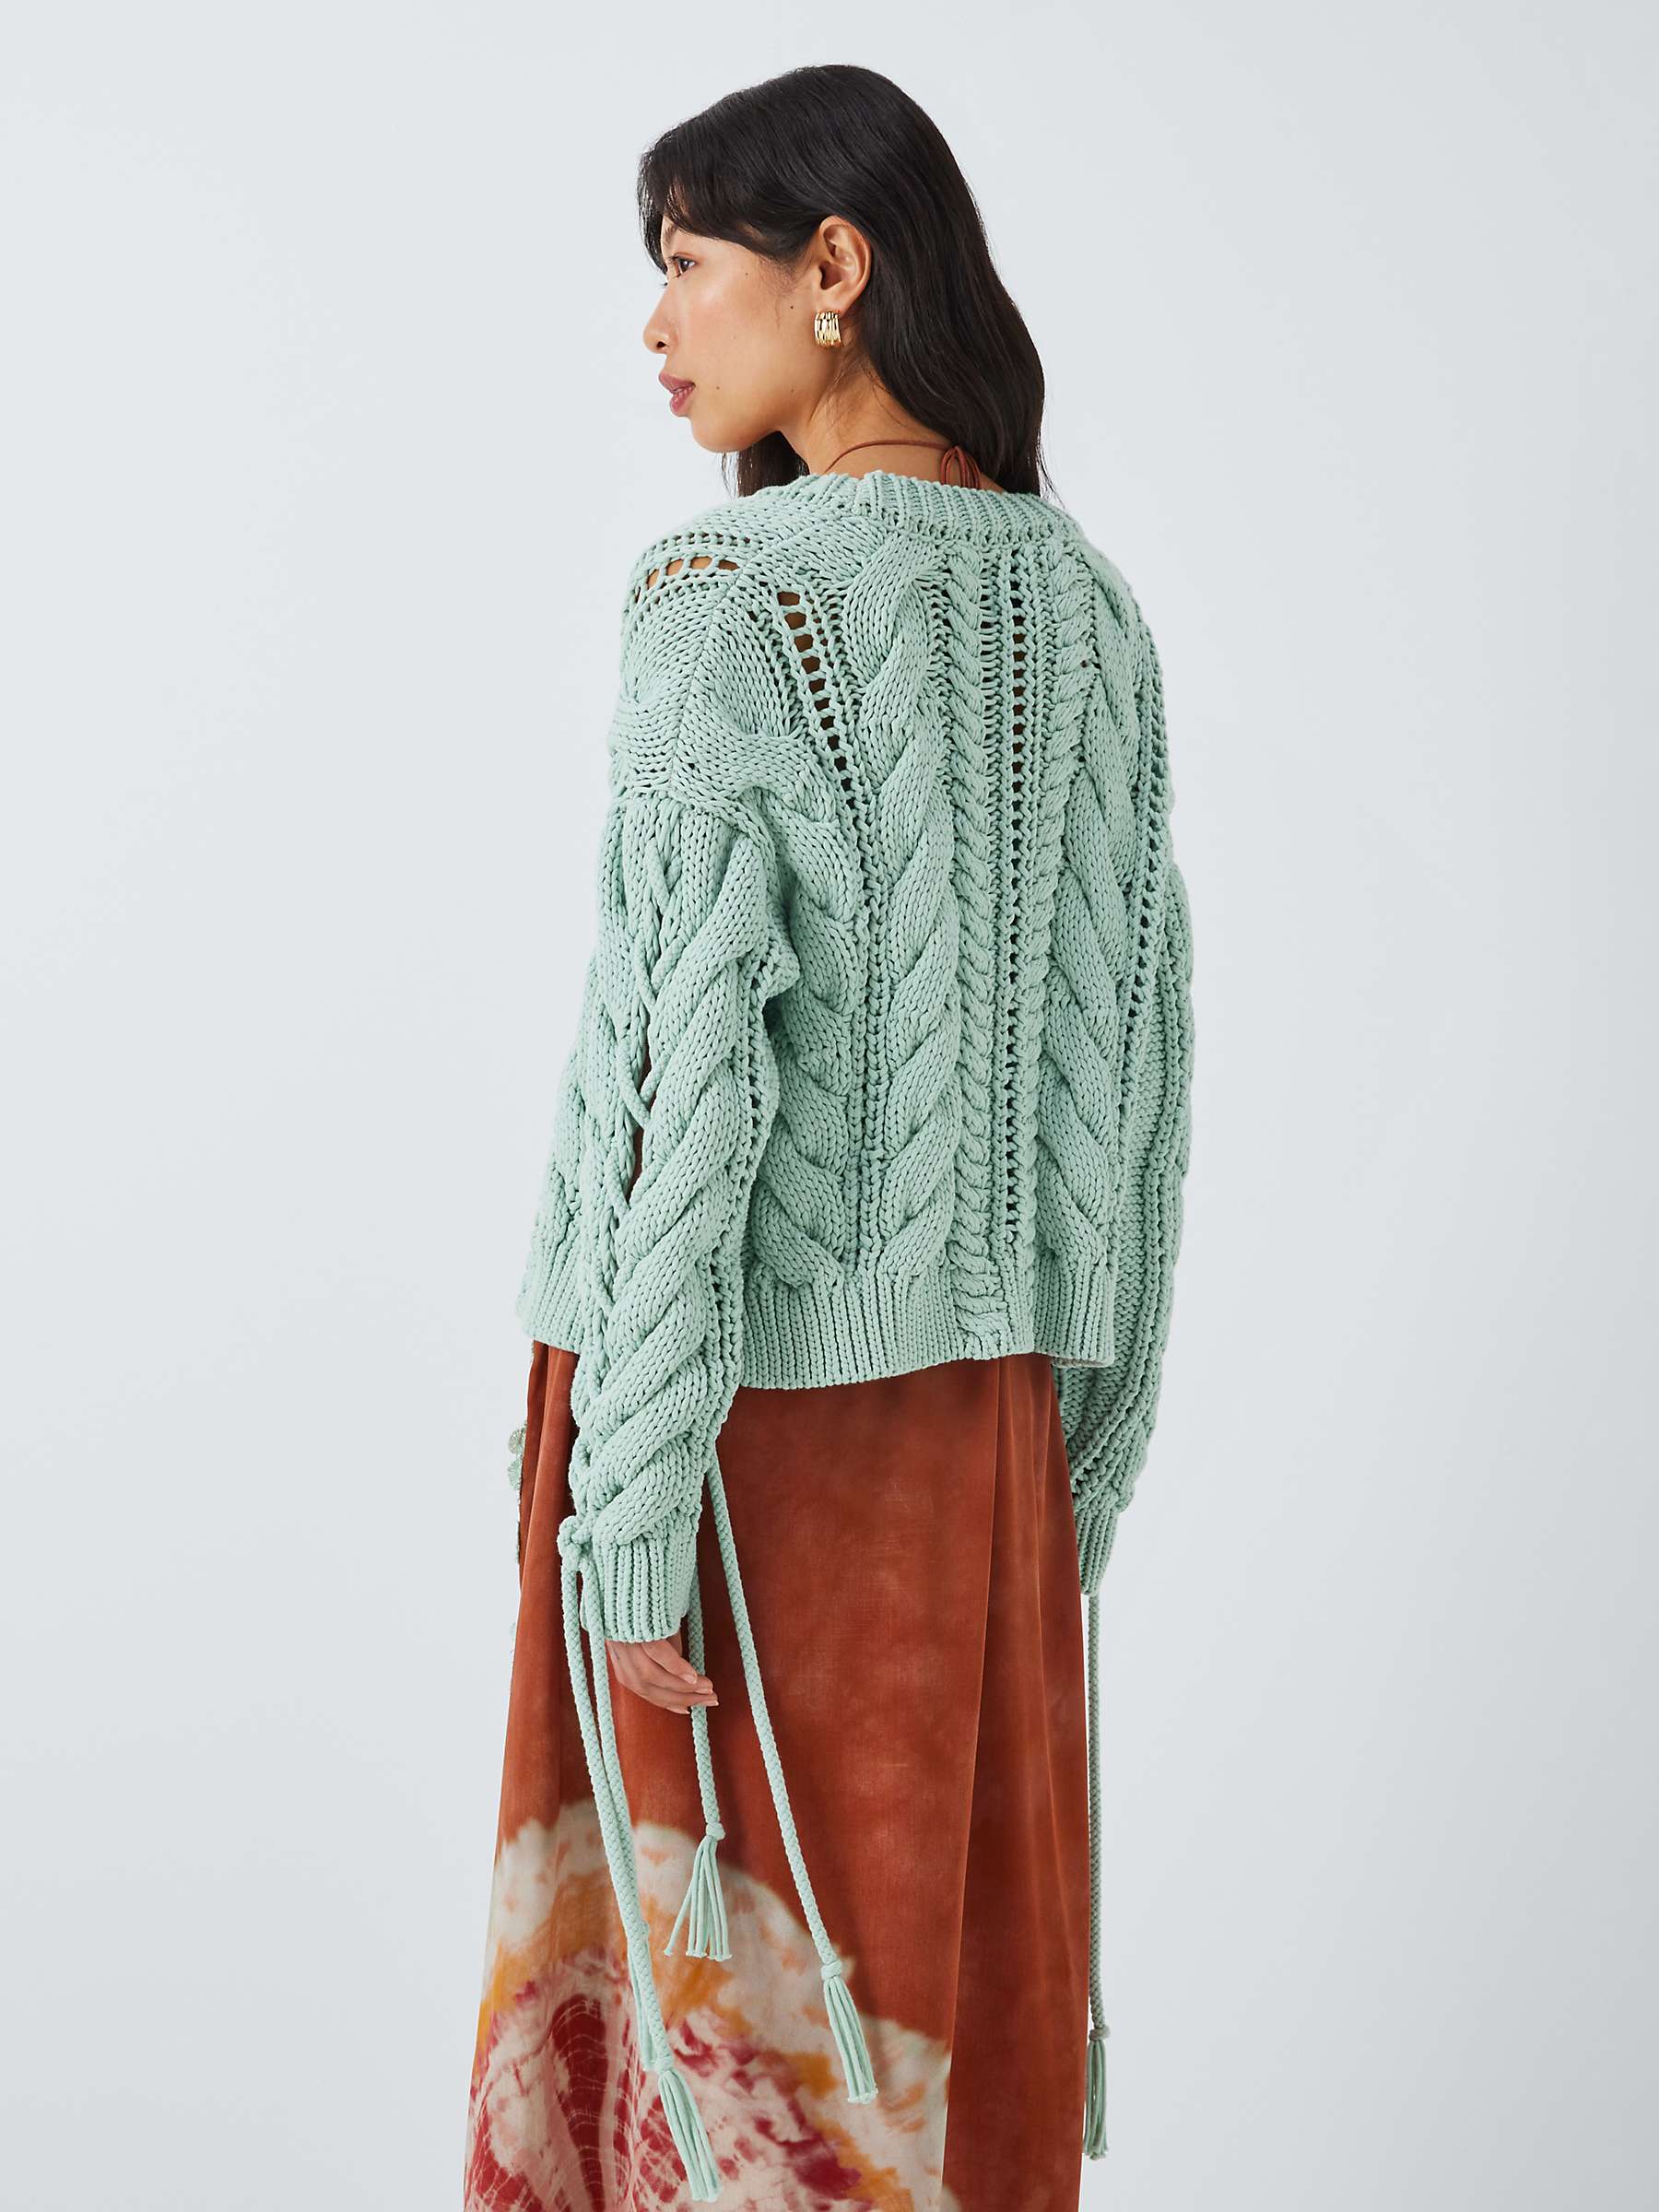 Buy Hayley Menzies Cable Knit Lace Up Cardigan, Celeste Online at johnlewis.com